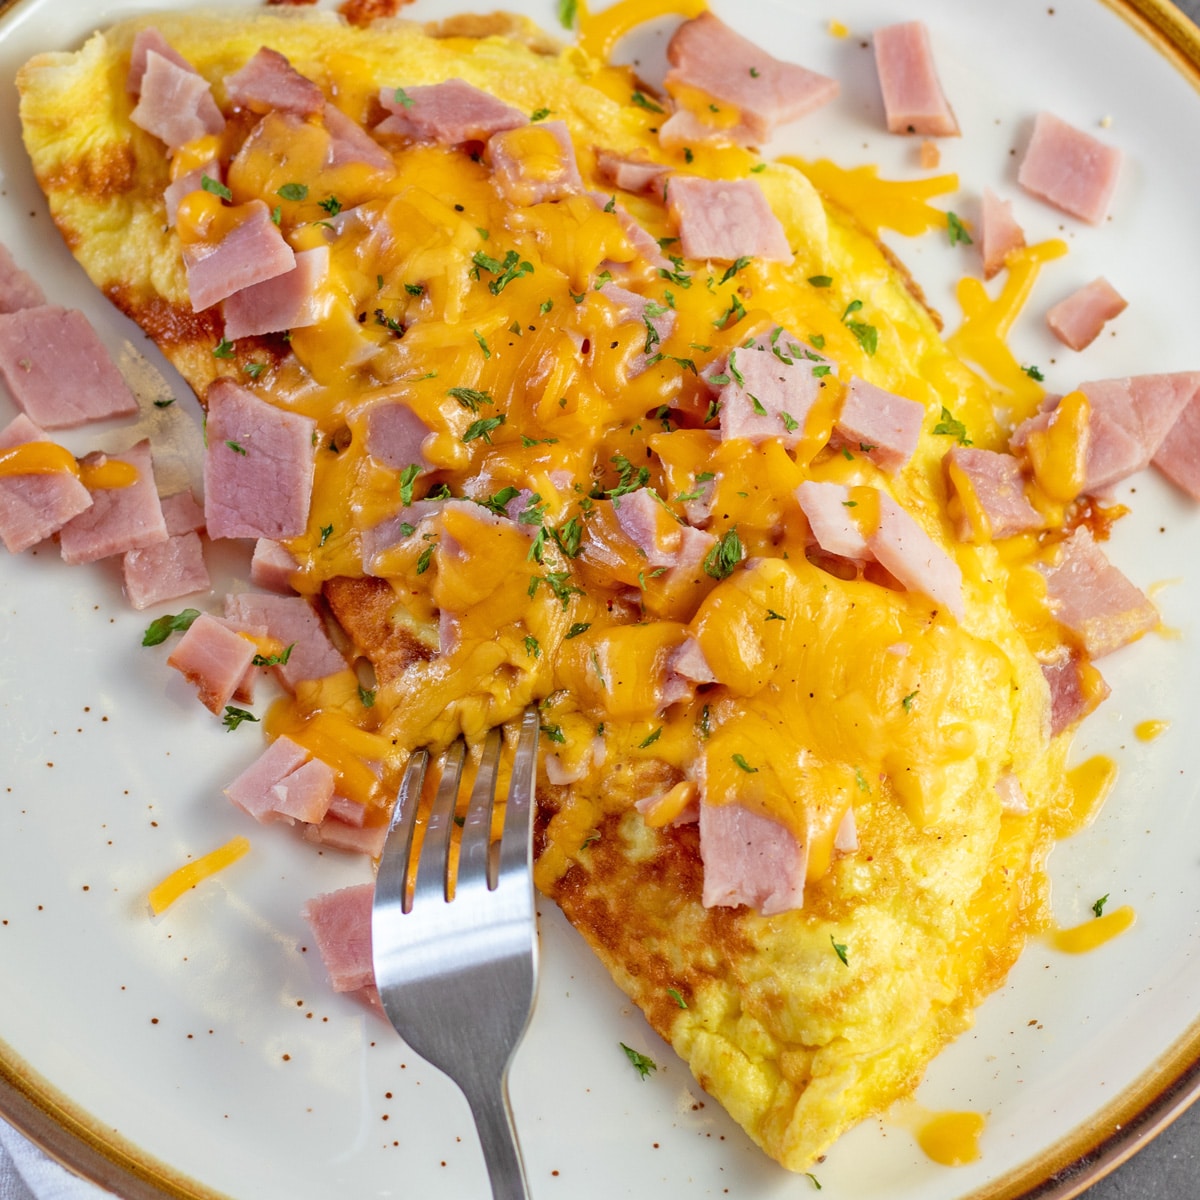 Tasty ham and cheese omelet on tan plate with light brown rim and fork tines near the omelet.